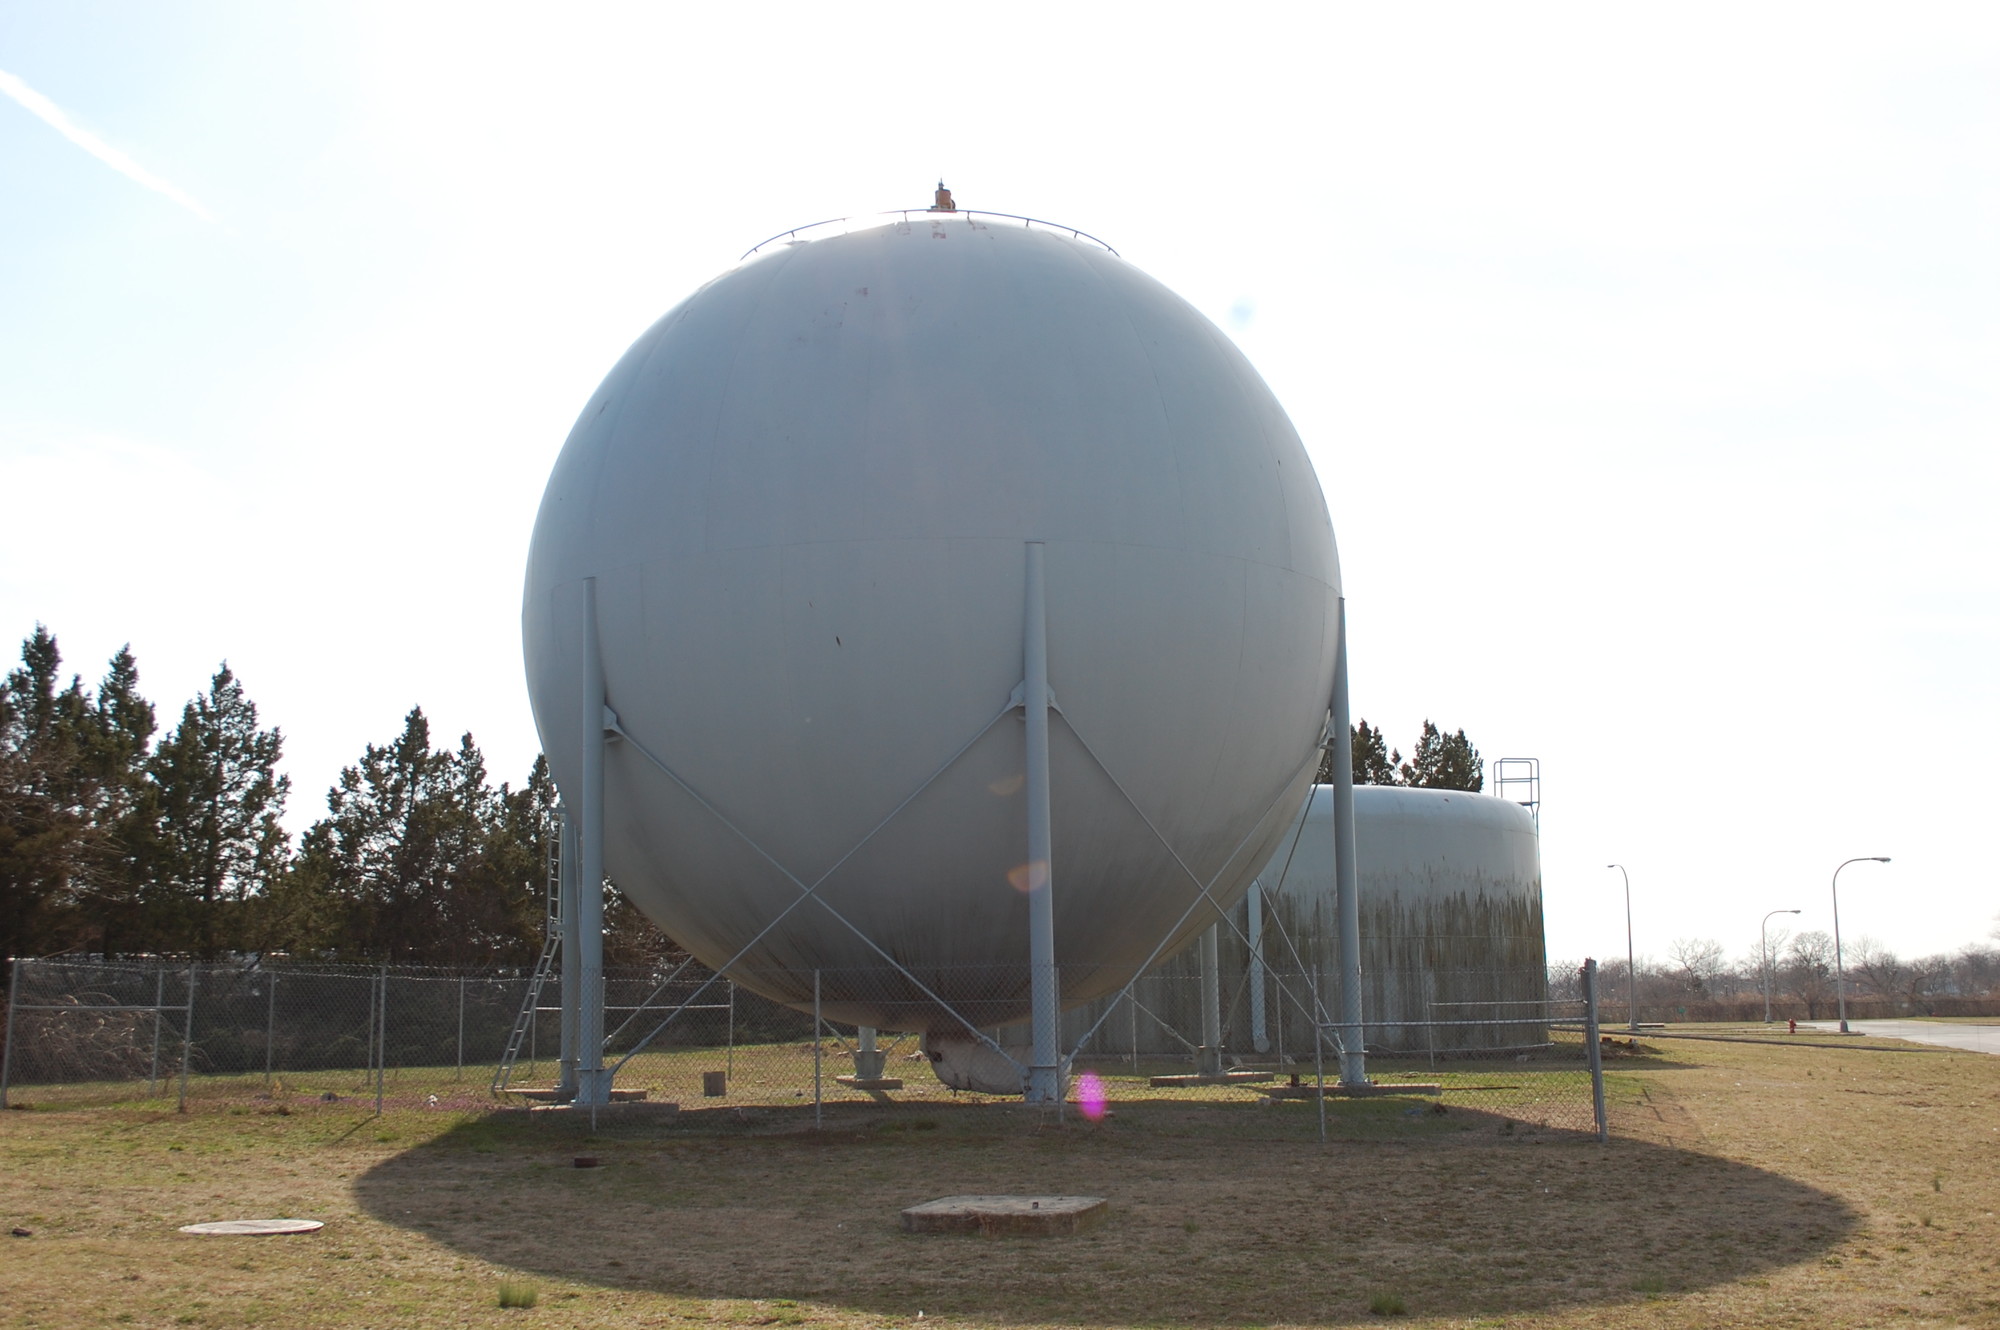 The methane sphere stores gas that is used to power parts of the plant.